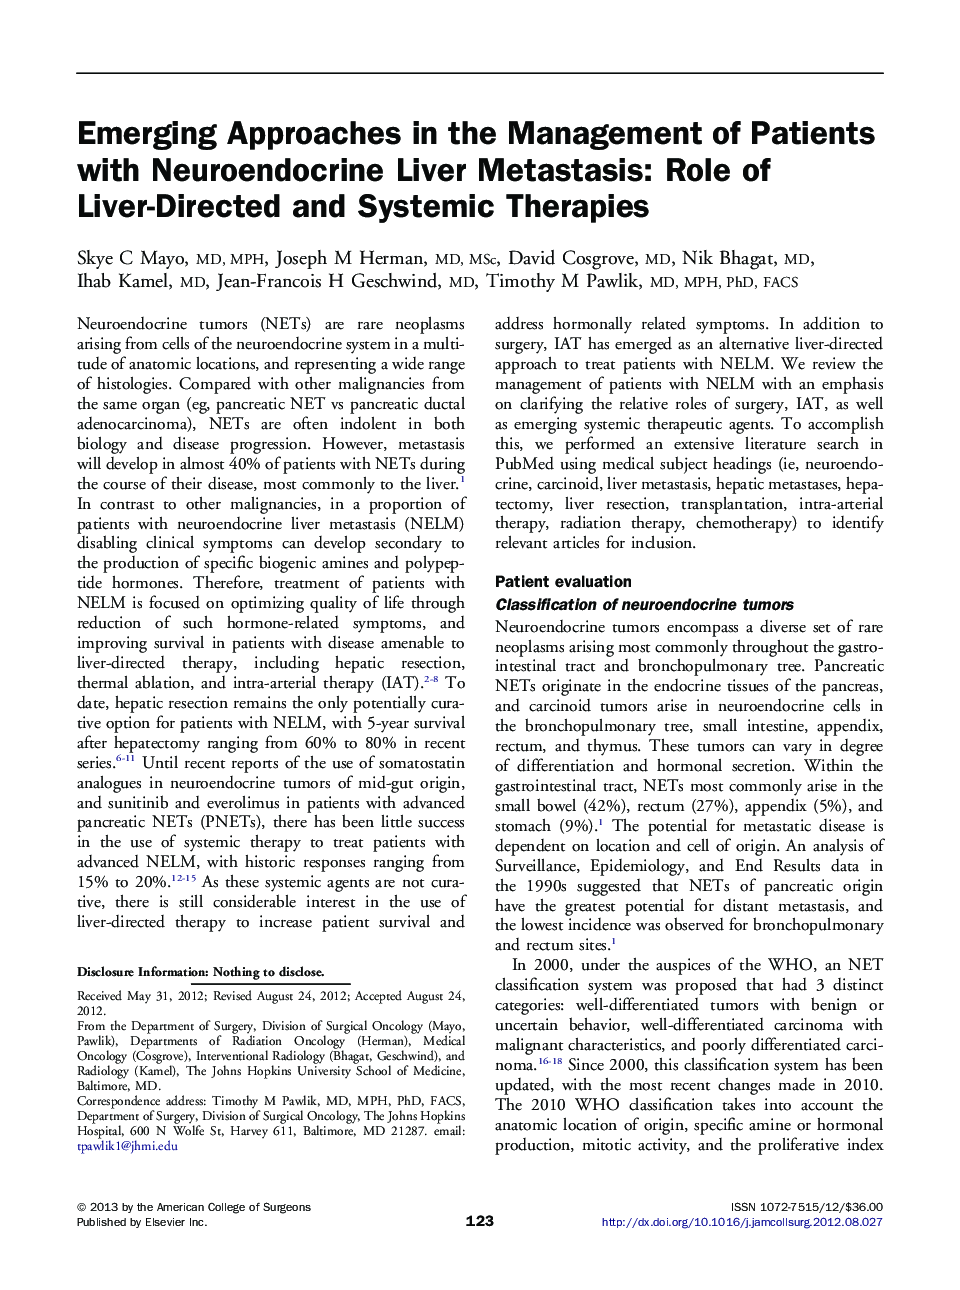 Emerging Approaches in the Management of Patients with Neuroendocrine Liver Metastasis: Role of Liver-Directed and Systemic Therapies